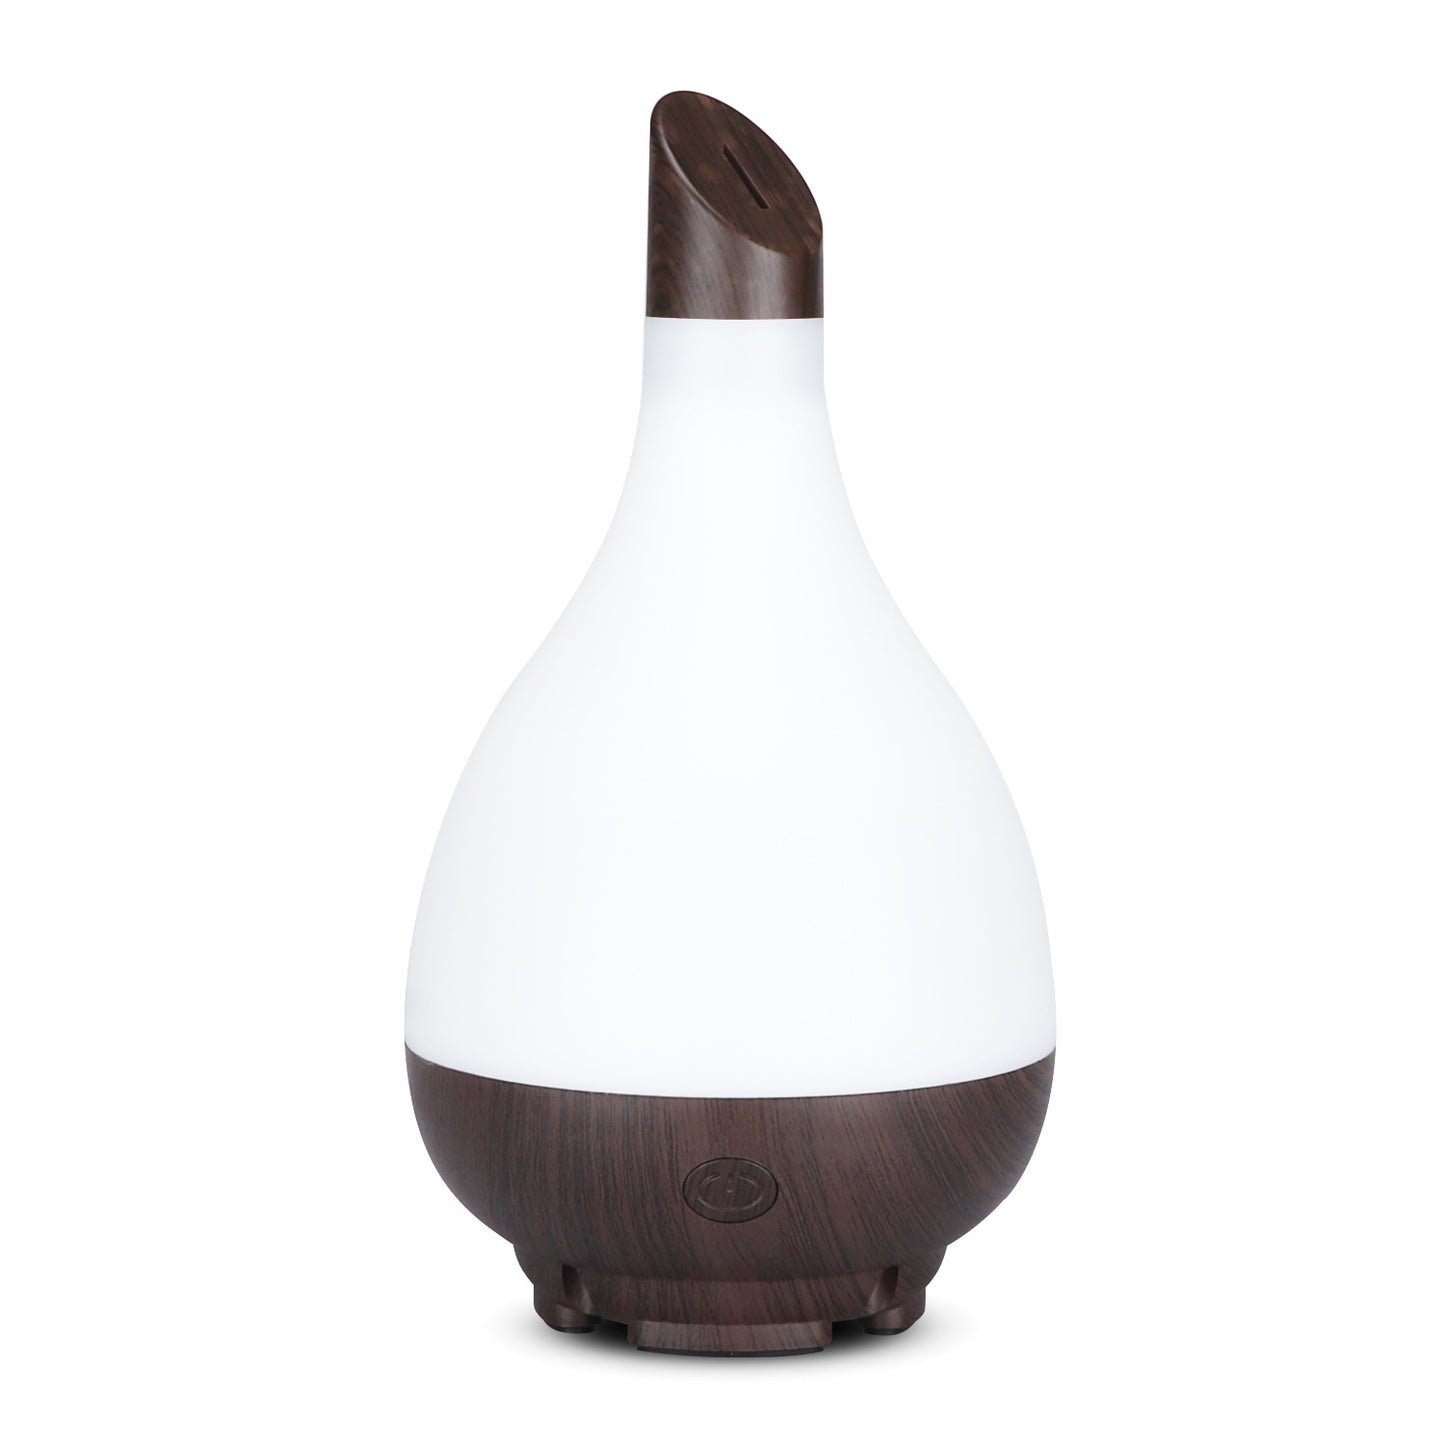 The Simple Aroma Diffuser